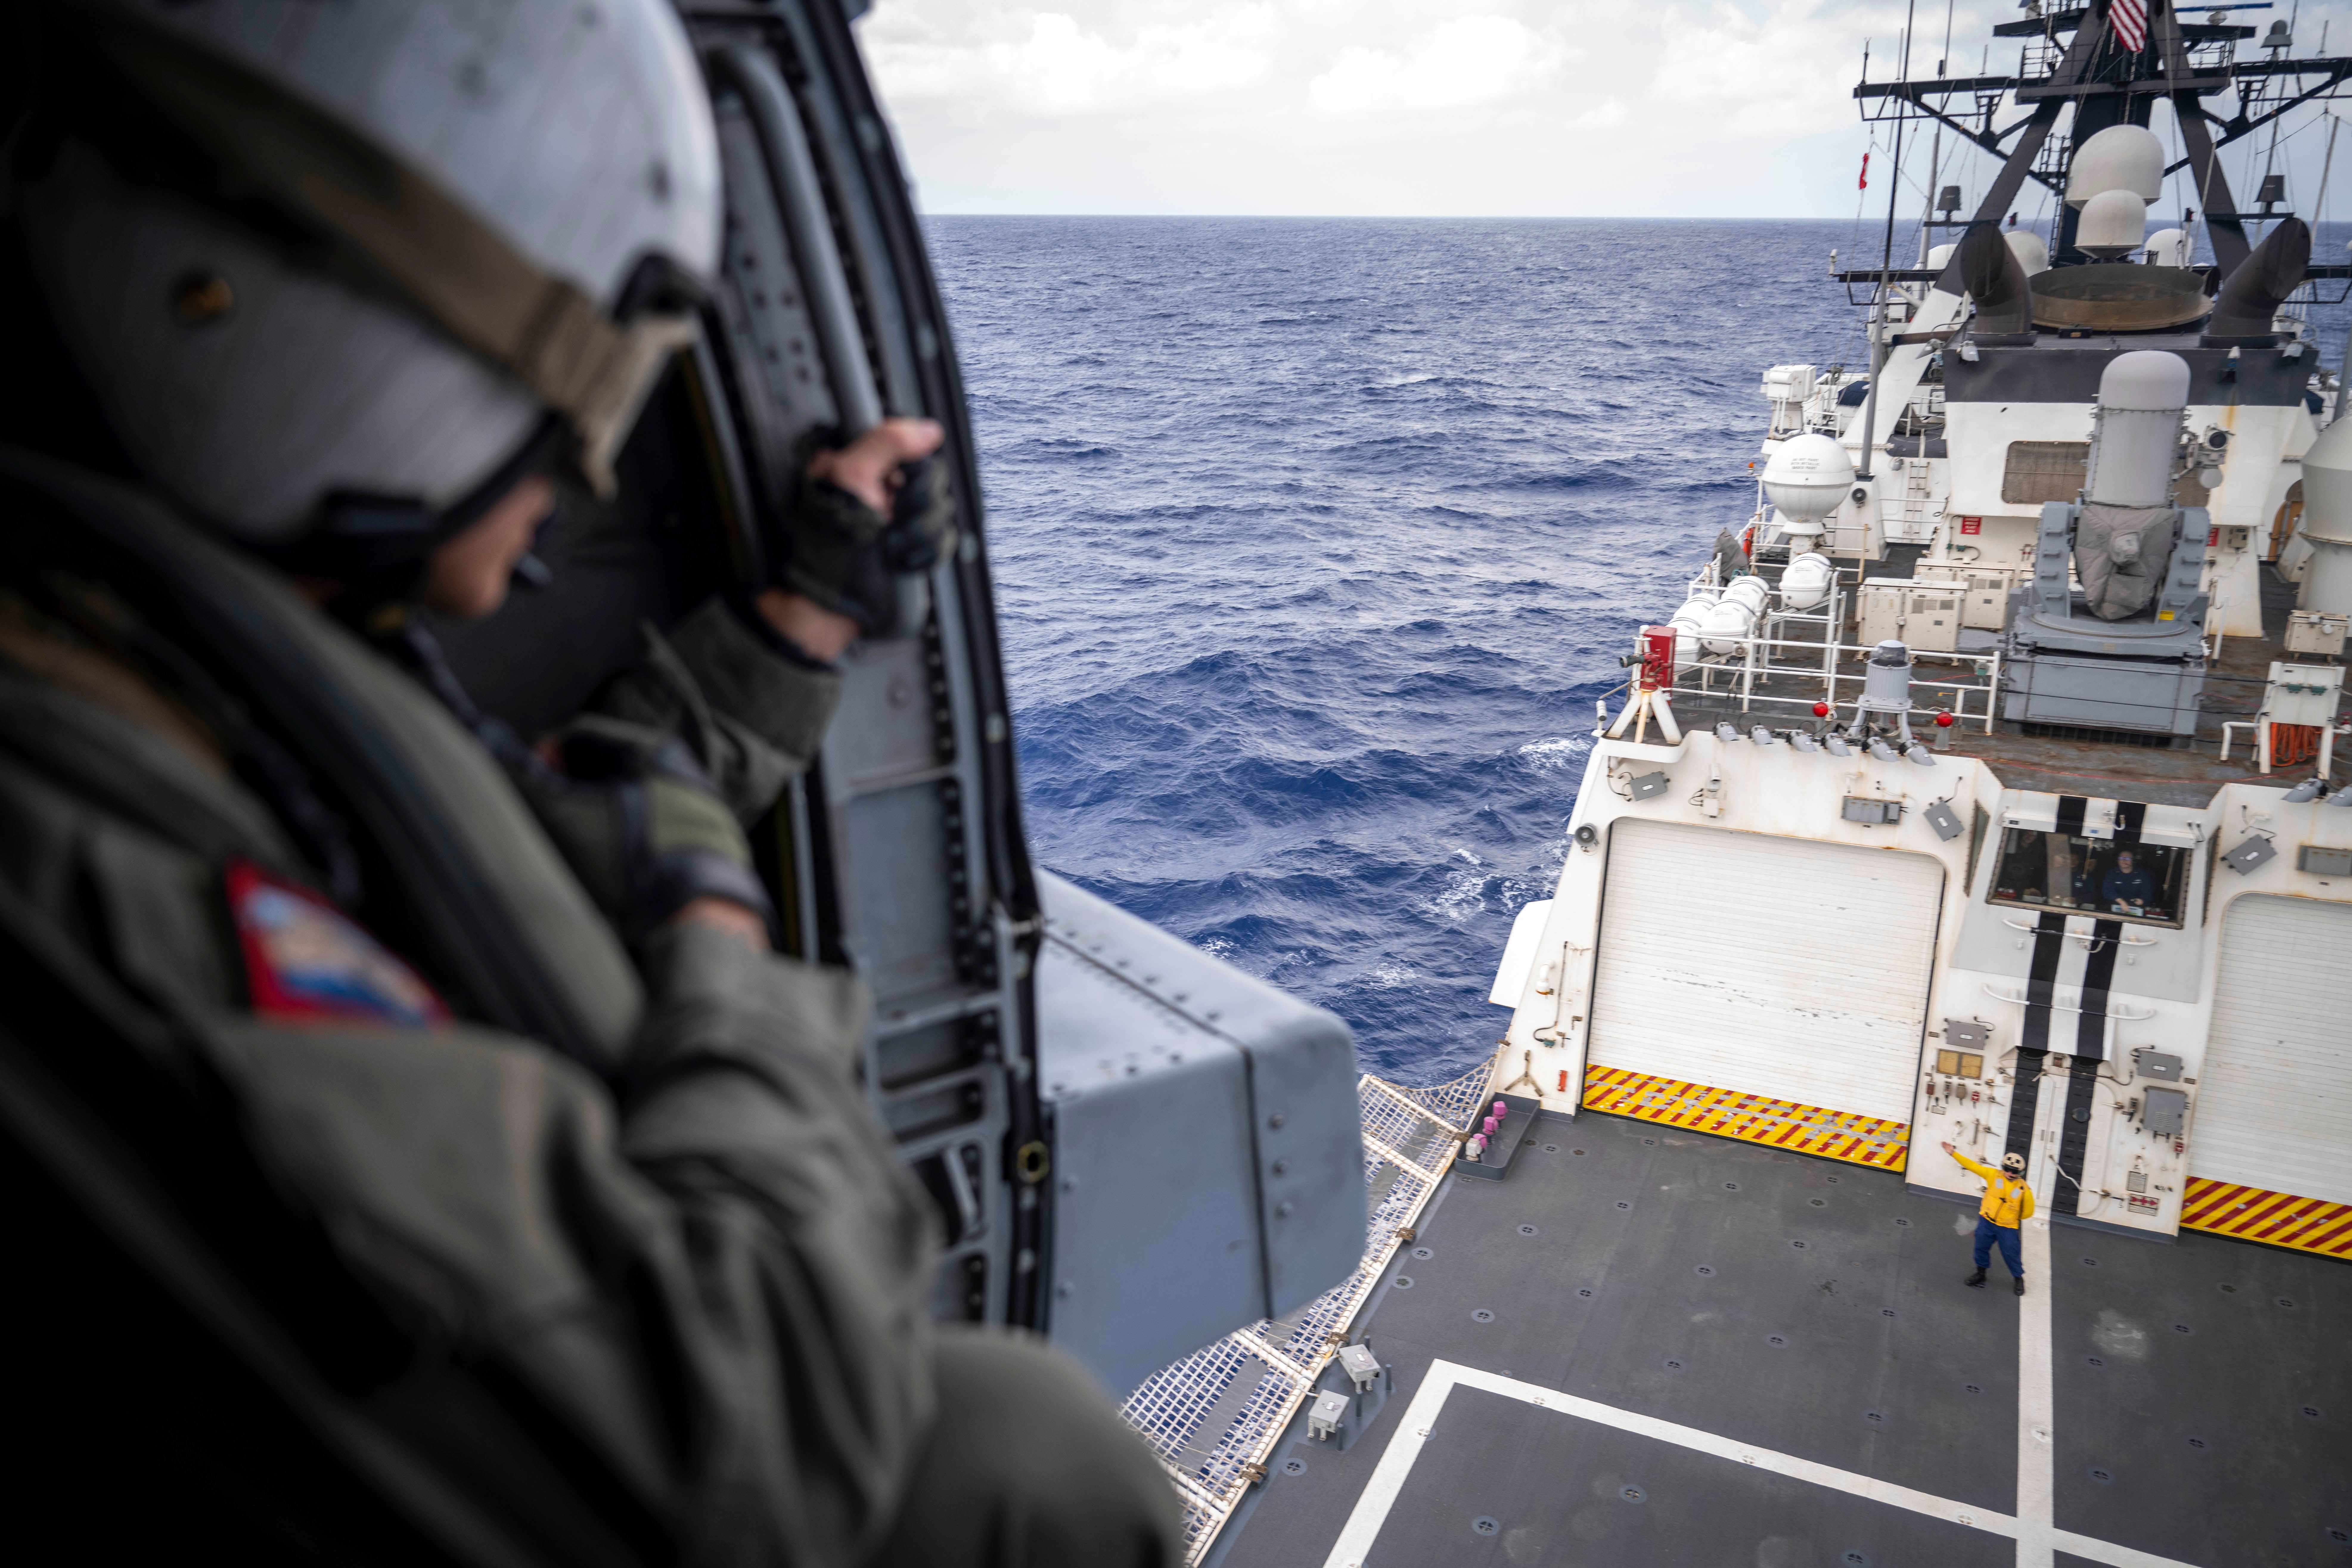 PACIFIC OCEAN (July 30, 2022) U.S. Navy Petty Officer 1st Class Humberto Alba, a naval aircrewman tactical-helicopter, attached to Helicopter Maritime Strike Squadron (HSM) 37, deployed on U.S. Coast Guard Legend-class cutter USCGC Midgett (WMSL 757), looks down at a USCGC crewmember after taking off during flight operations during Rim of the Pacific (RIMPAC) 2022. Twenty-six nations, 38 ships, three submarines, more than 170 aircraft and 25,000 personnel are participating in RIMPAC from June 29 to Aug. 4 in and around the Hawaiian Islands and Southern California. The world's largest international maritime exercise, RIMPAC provides a unique training opportunity while fostering and sustaining cooperative relationships among participants critical to ensuring the safety of sea lanes and security on the world's oceans. RIMPAC 2022 is the 28th exercise in the series that began in 1971. (U.S. Coast Guard photo by Petty Officer 3rd Class Taylor Bacon)